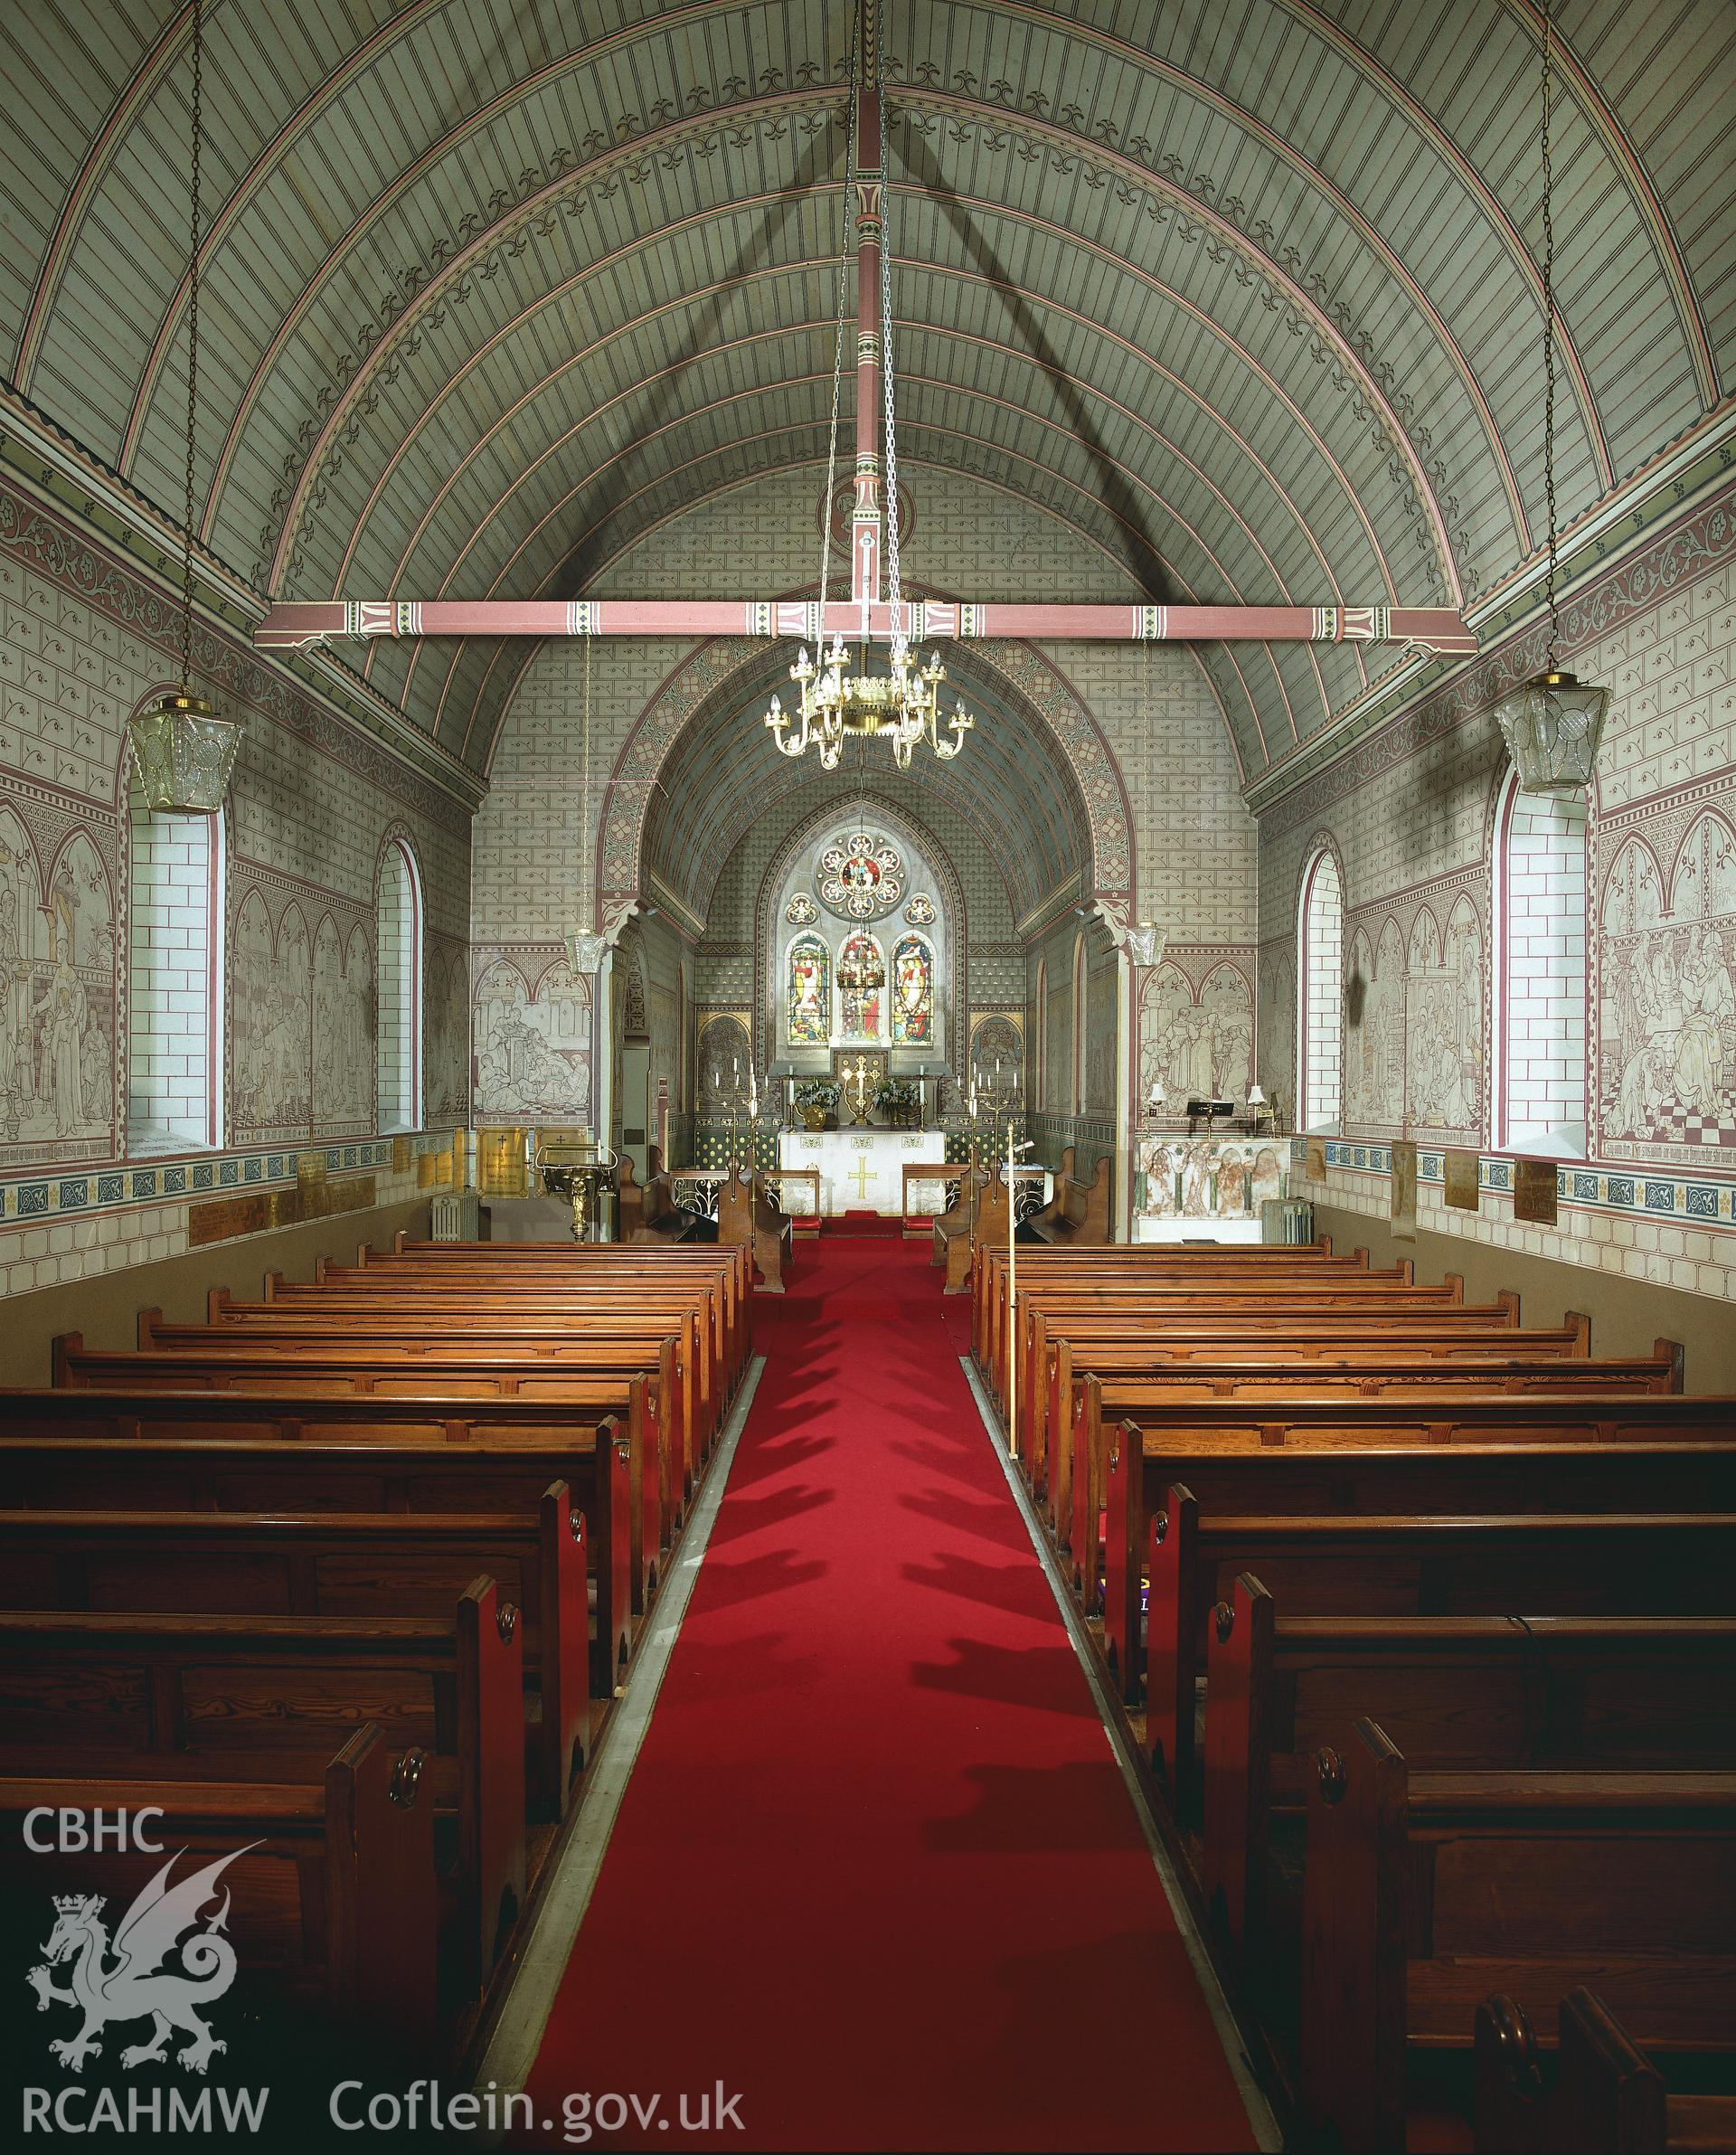 RCAHMW colour transparency of an interior view of Holy Trinity Church, Pontargothi.